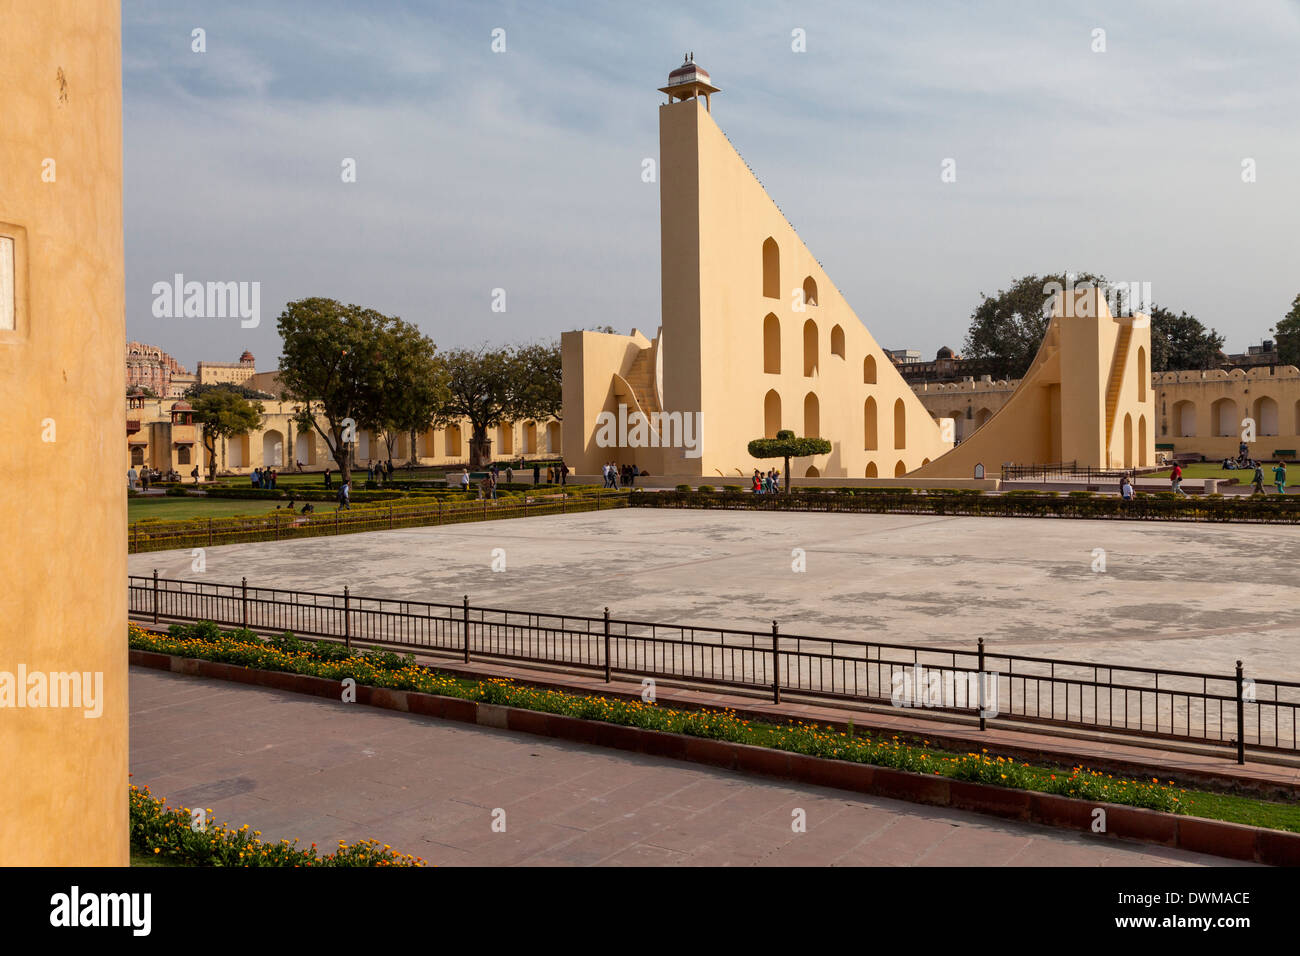 Jaipur, Rajasthan, India. Jantar Mantar, an 18th-century Site for Astronomical Observations, now a World Heritage Site. Stock Photo